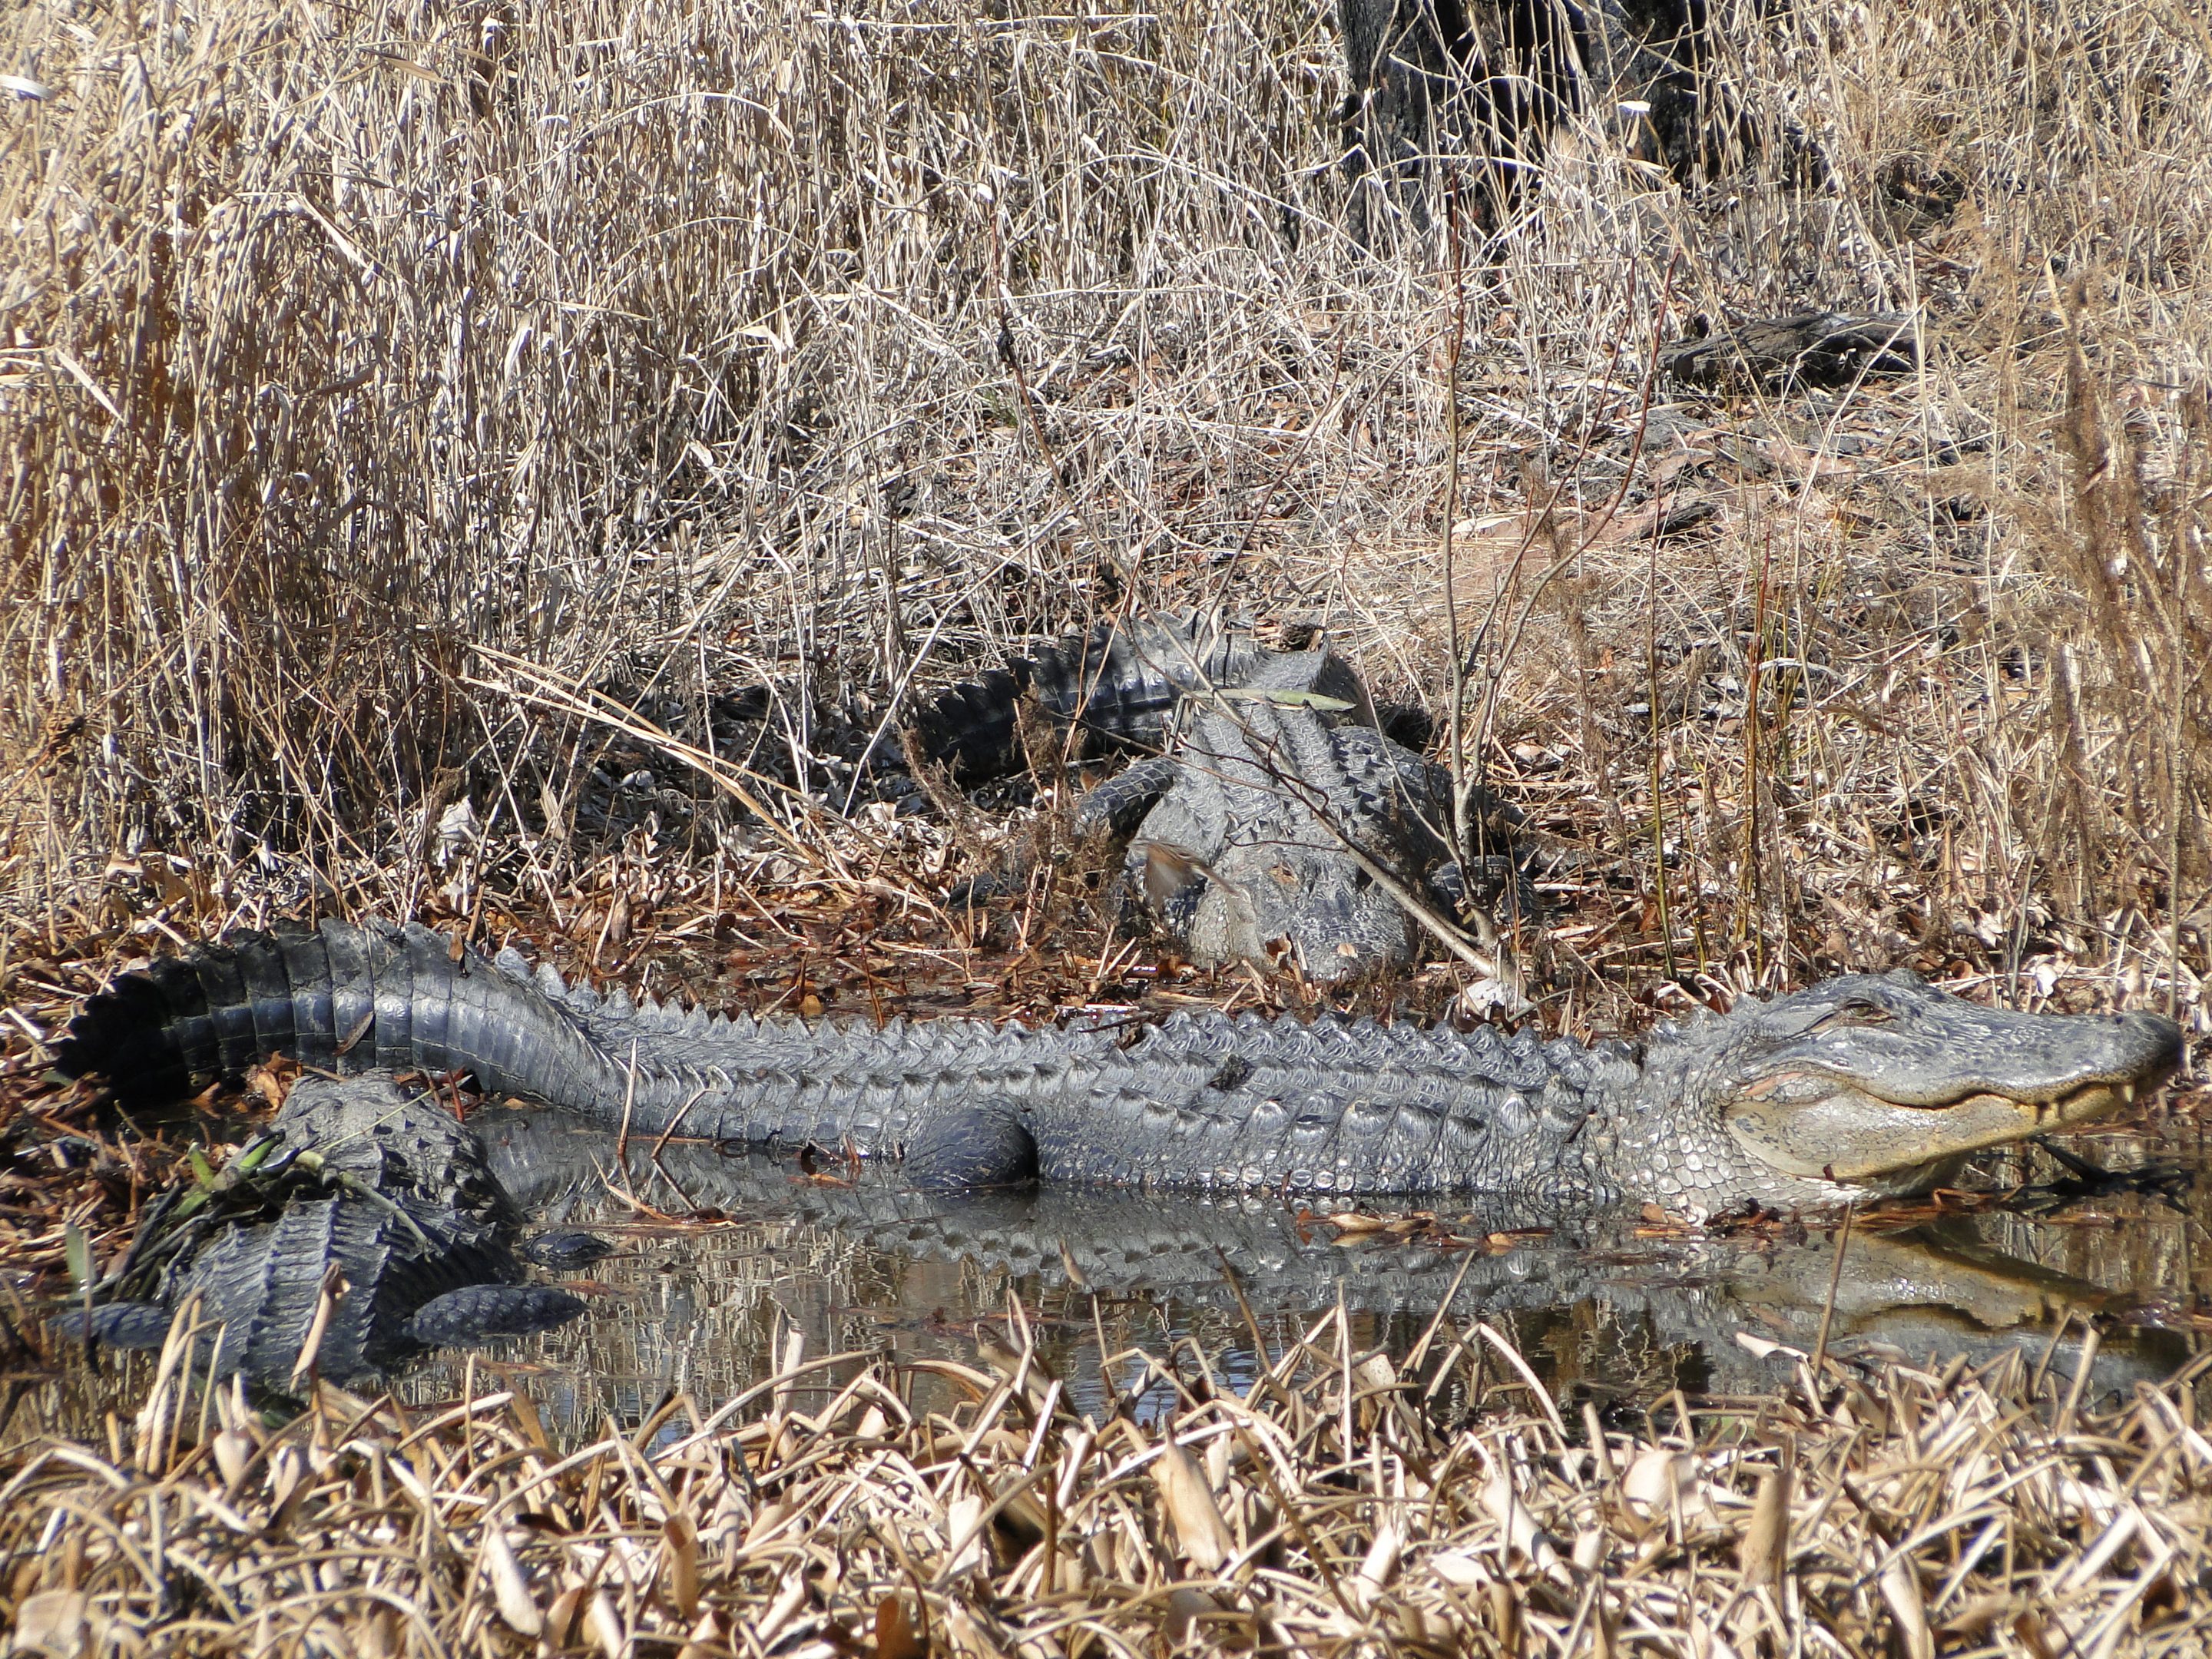 You want to see alligators, come to Cuddo